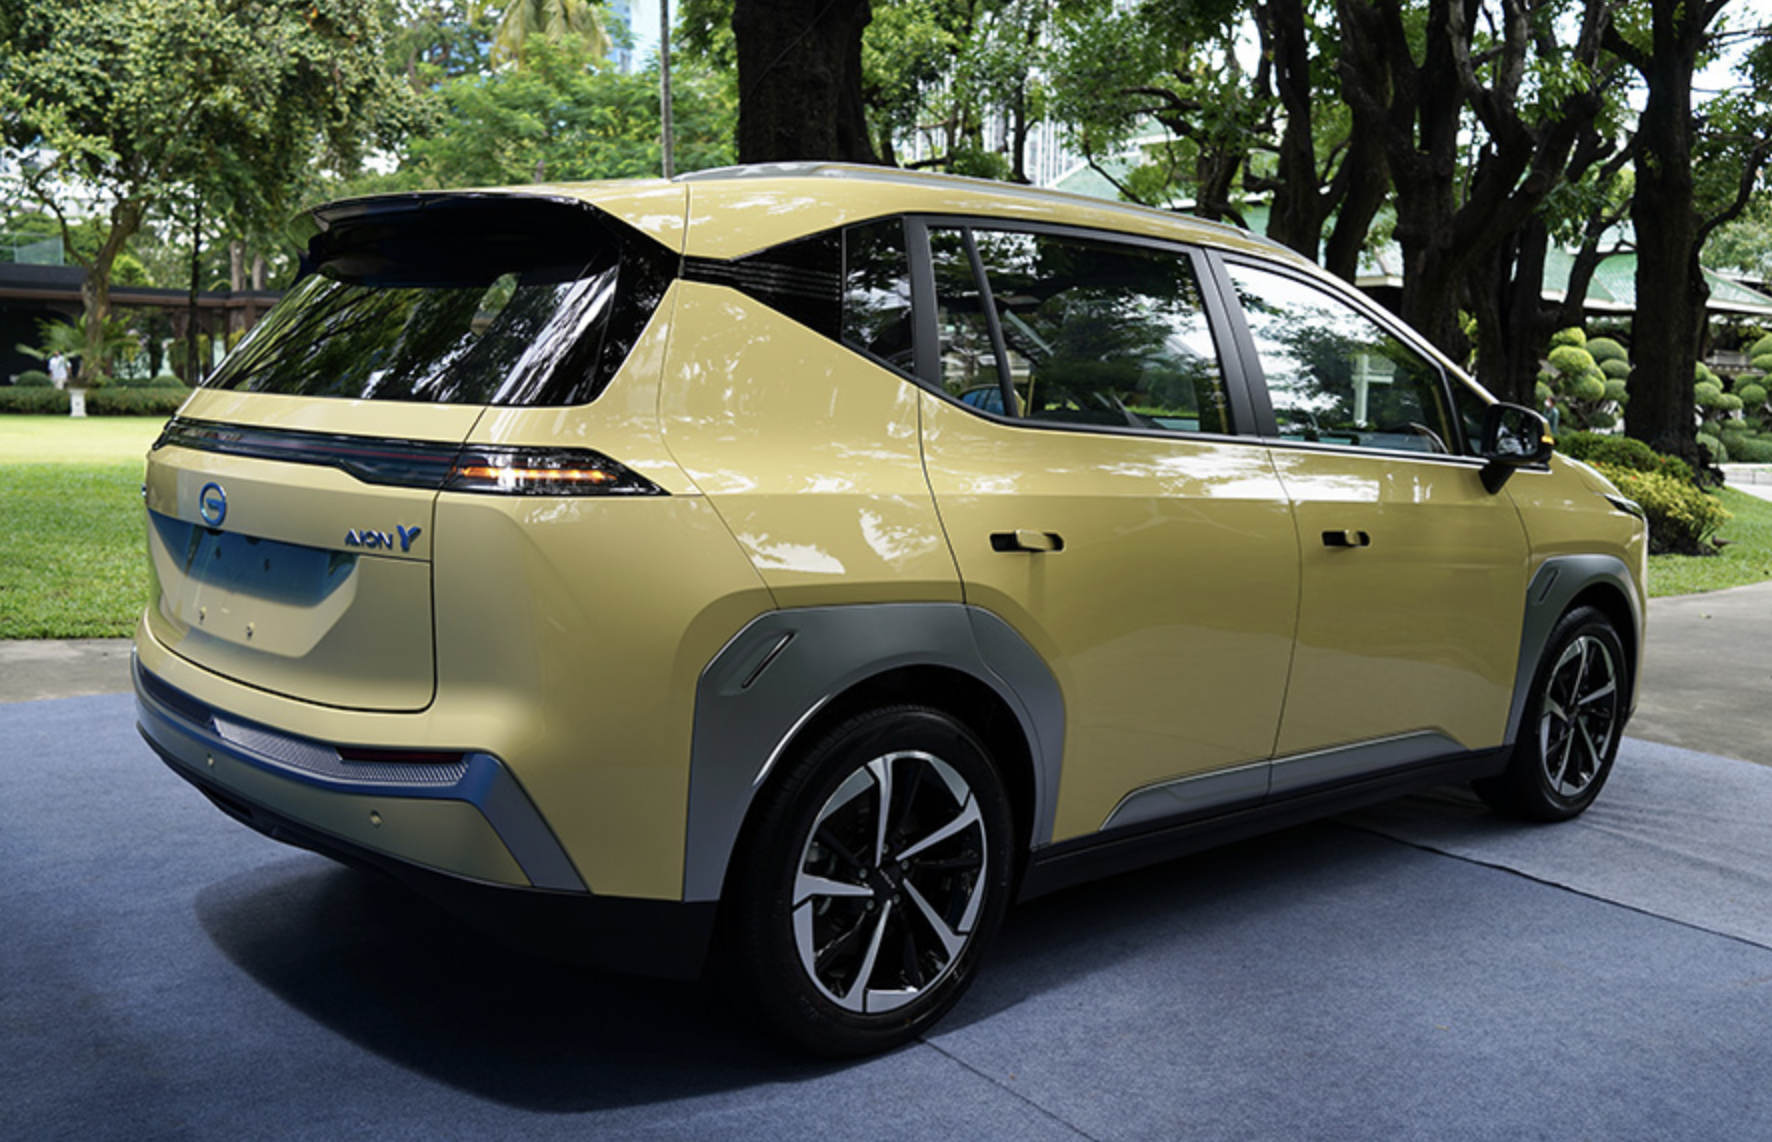 The Aion Y with a 69.9 kWh battery can run for 580 kilometers after being charged. Photo: GAC